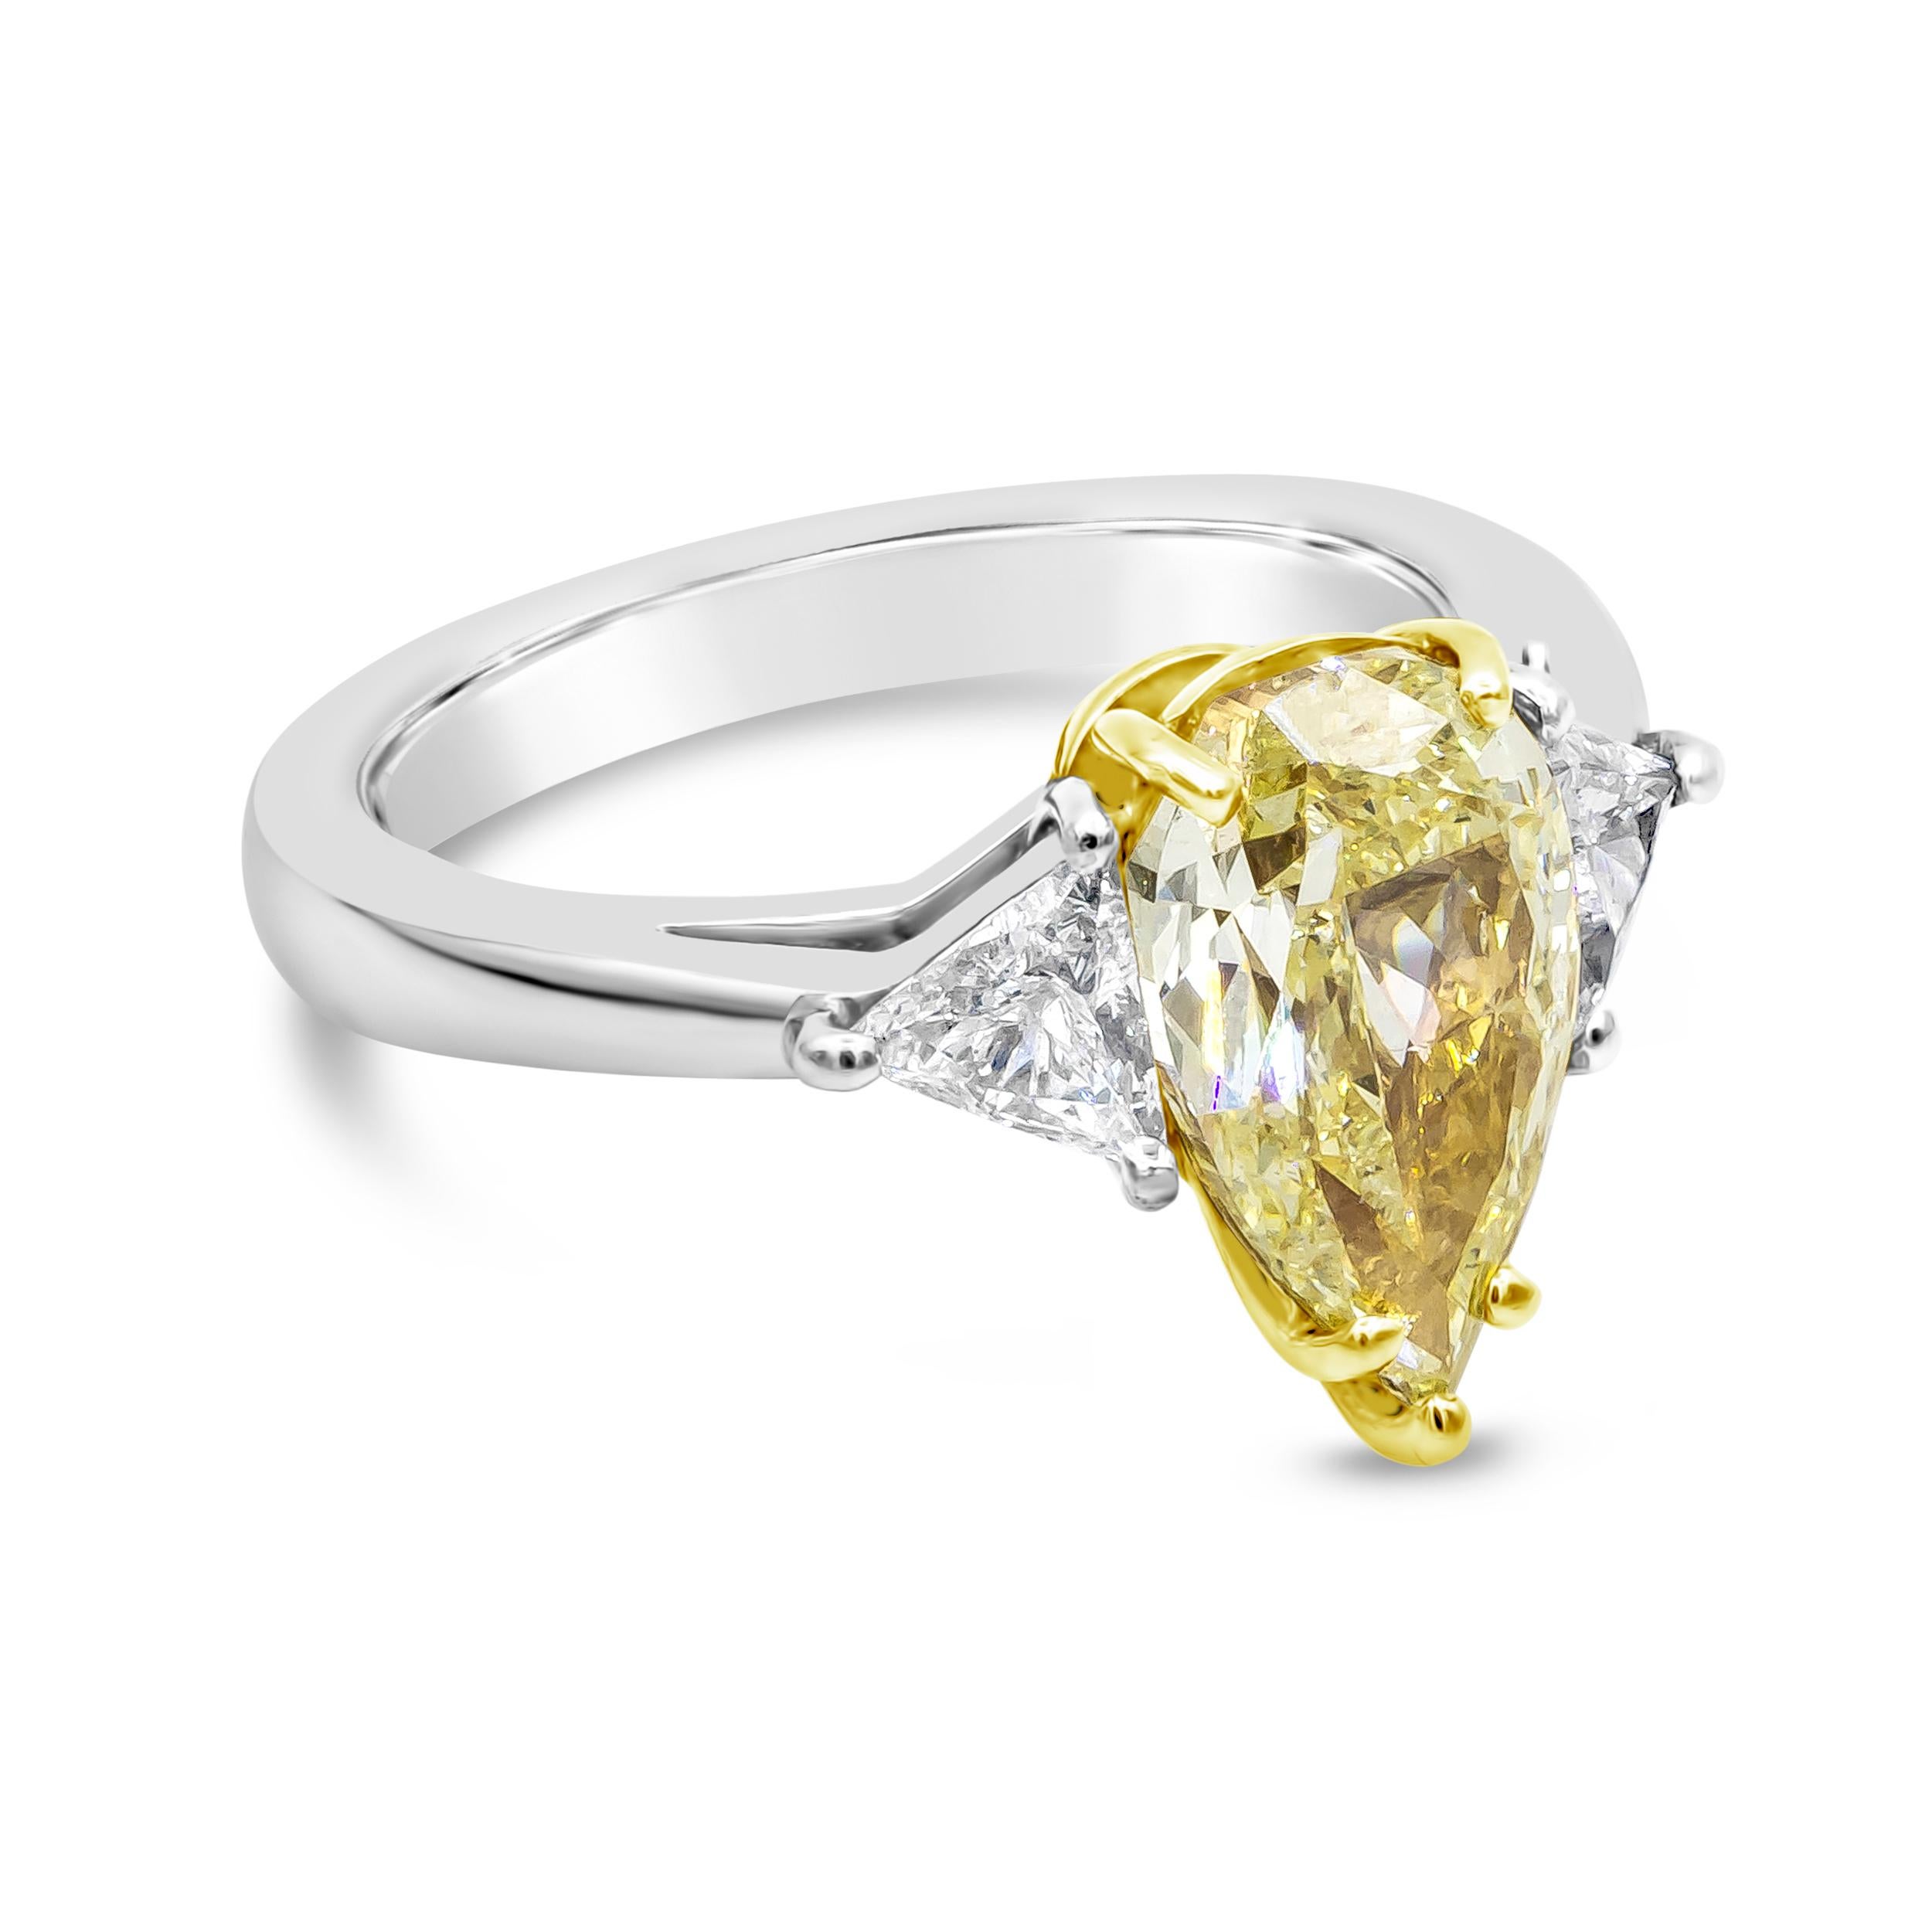 Showcasing a 2.45 carat natural pear shape yellow diamond flanked by a brilliant trillion diamond on either side. Accent diamonds weigh 0.47 carats. Set in a polished platinum mounting. GIA certified the center diamond as fancy light yellow in